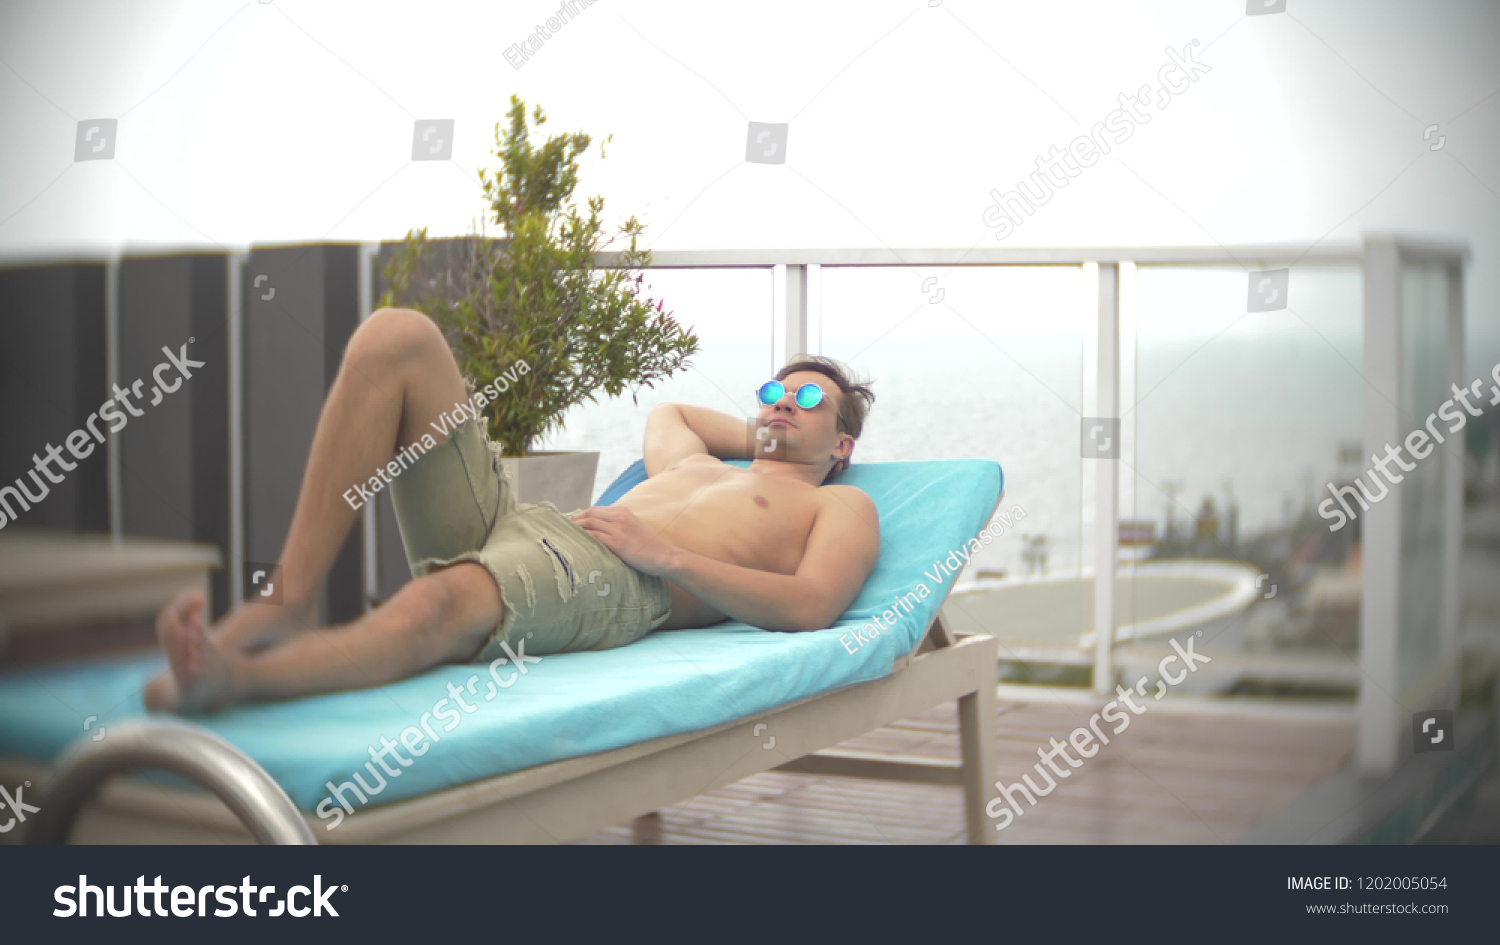 A man relaxing, sunbathing on the loungers near the pool on the roof overlooking the sea. background blur #1202005054